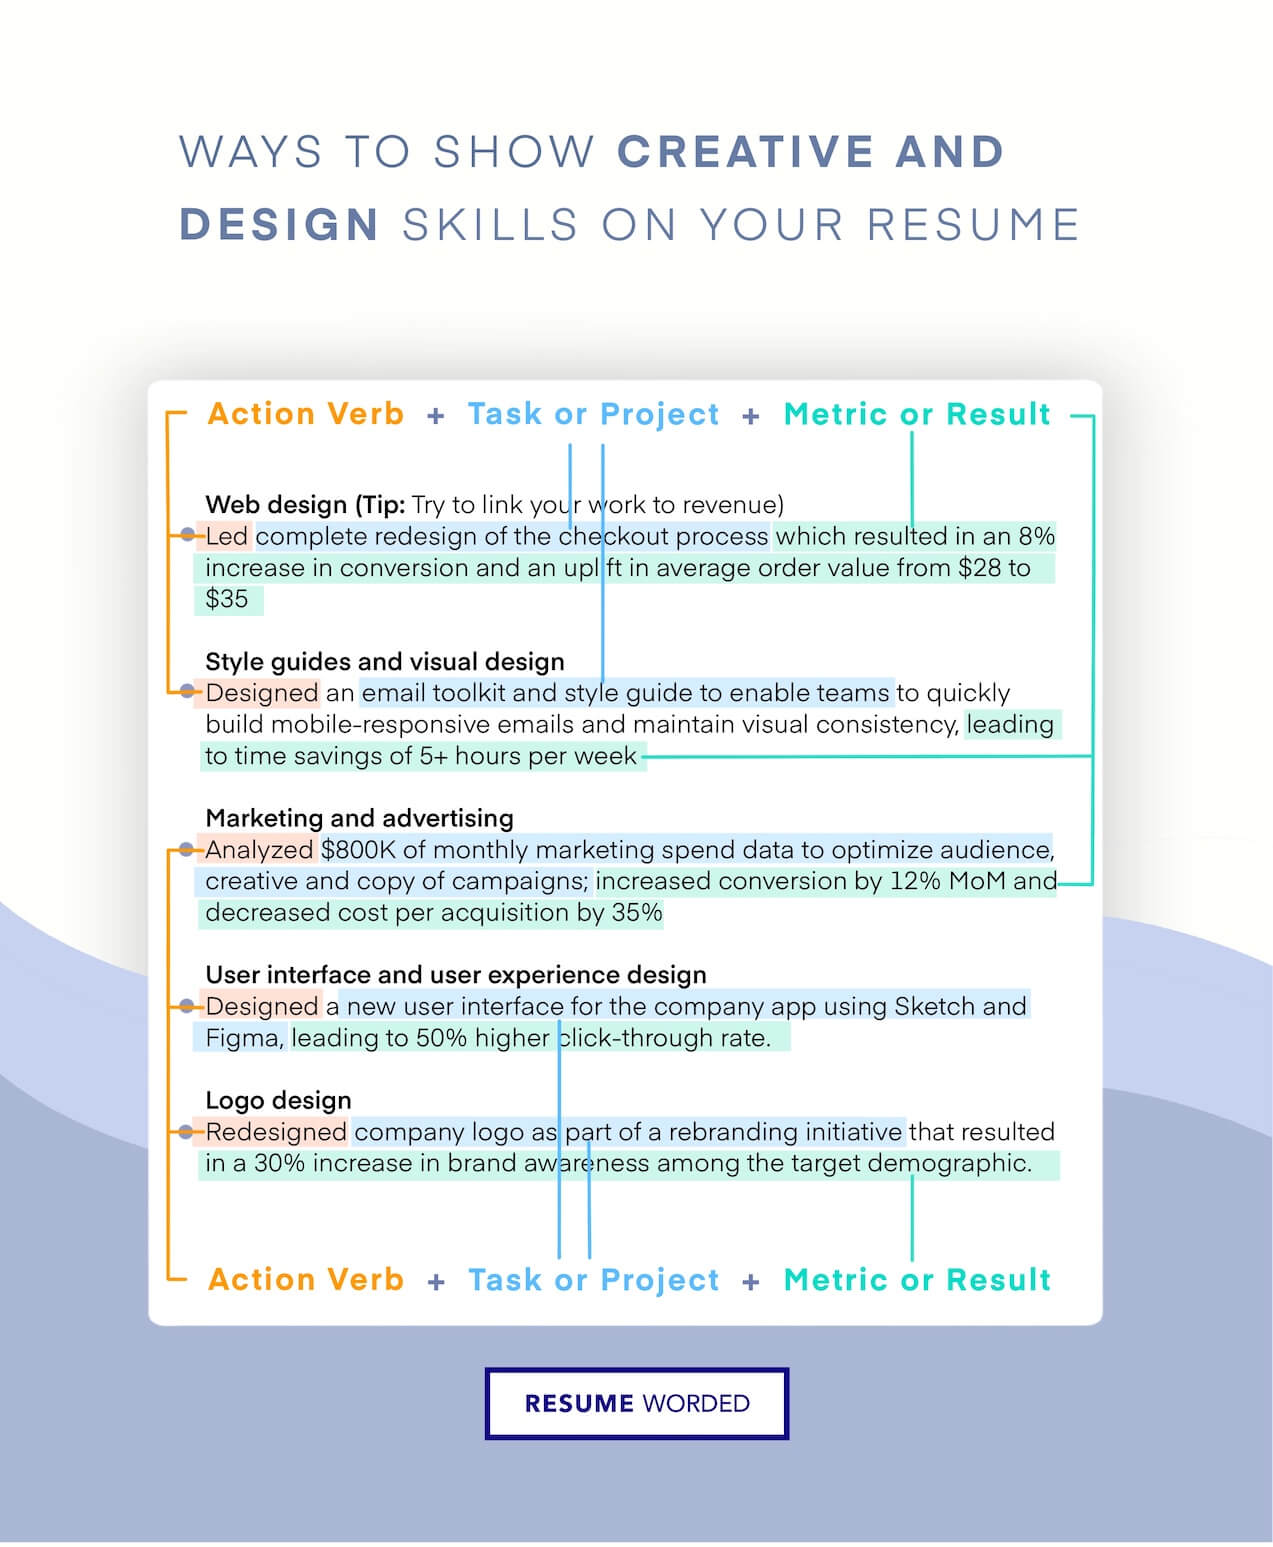 Showcase your experience creating proof of concept designs - Product Manager Resume